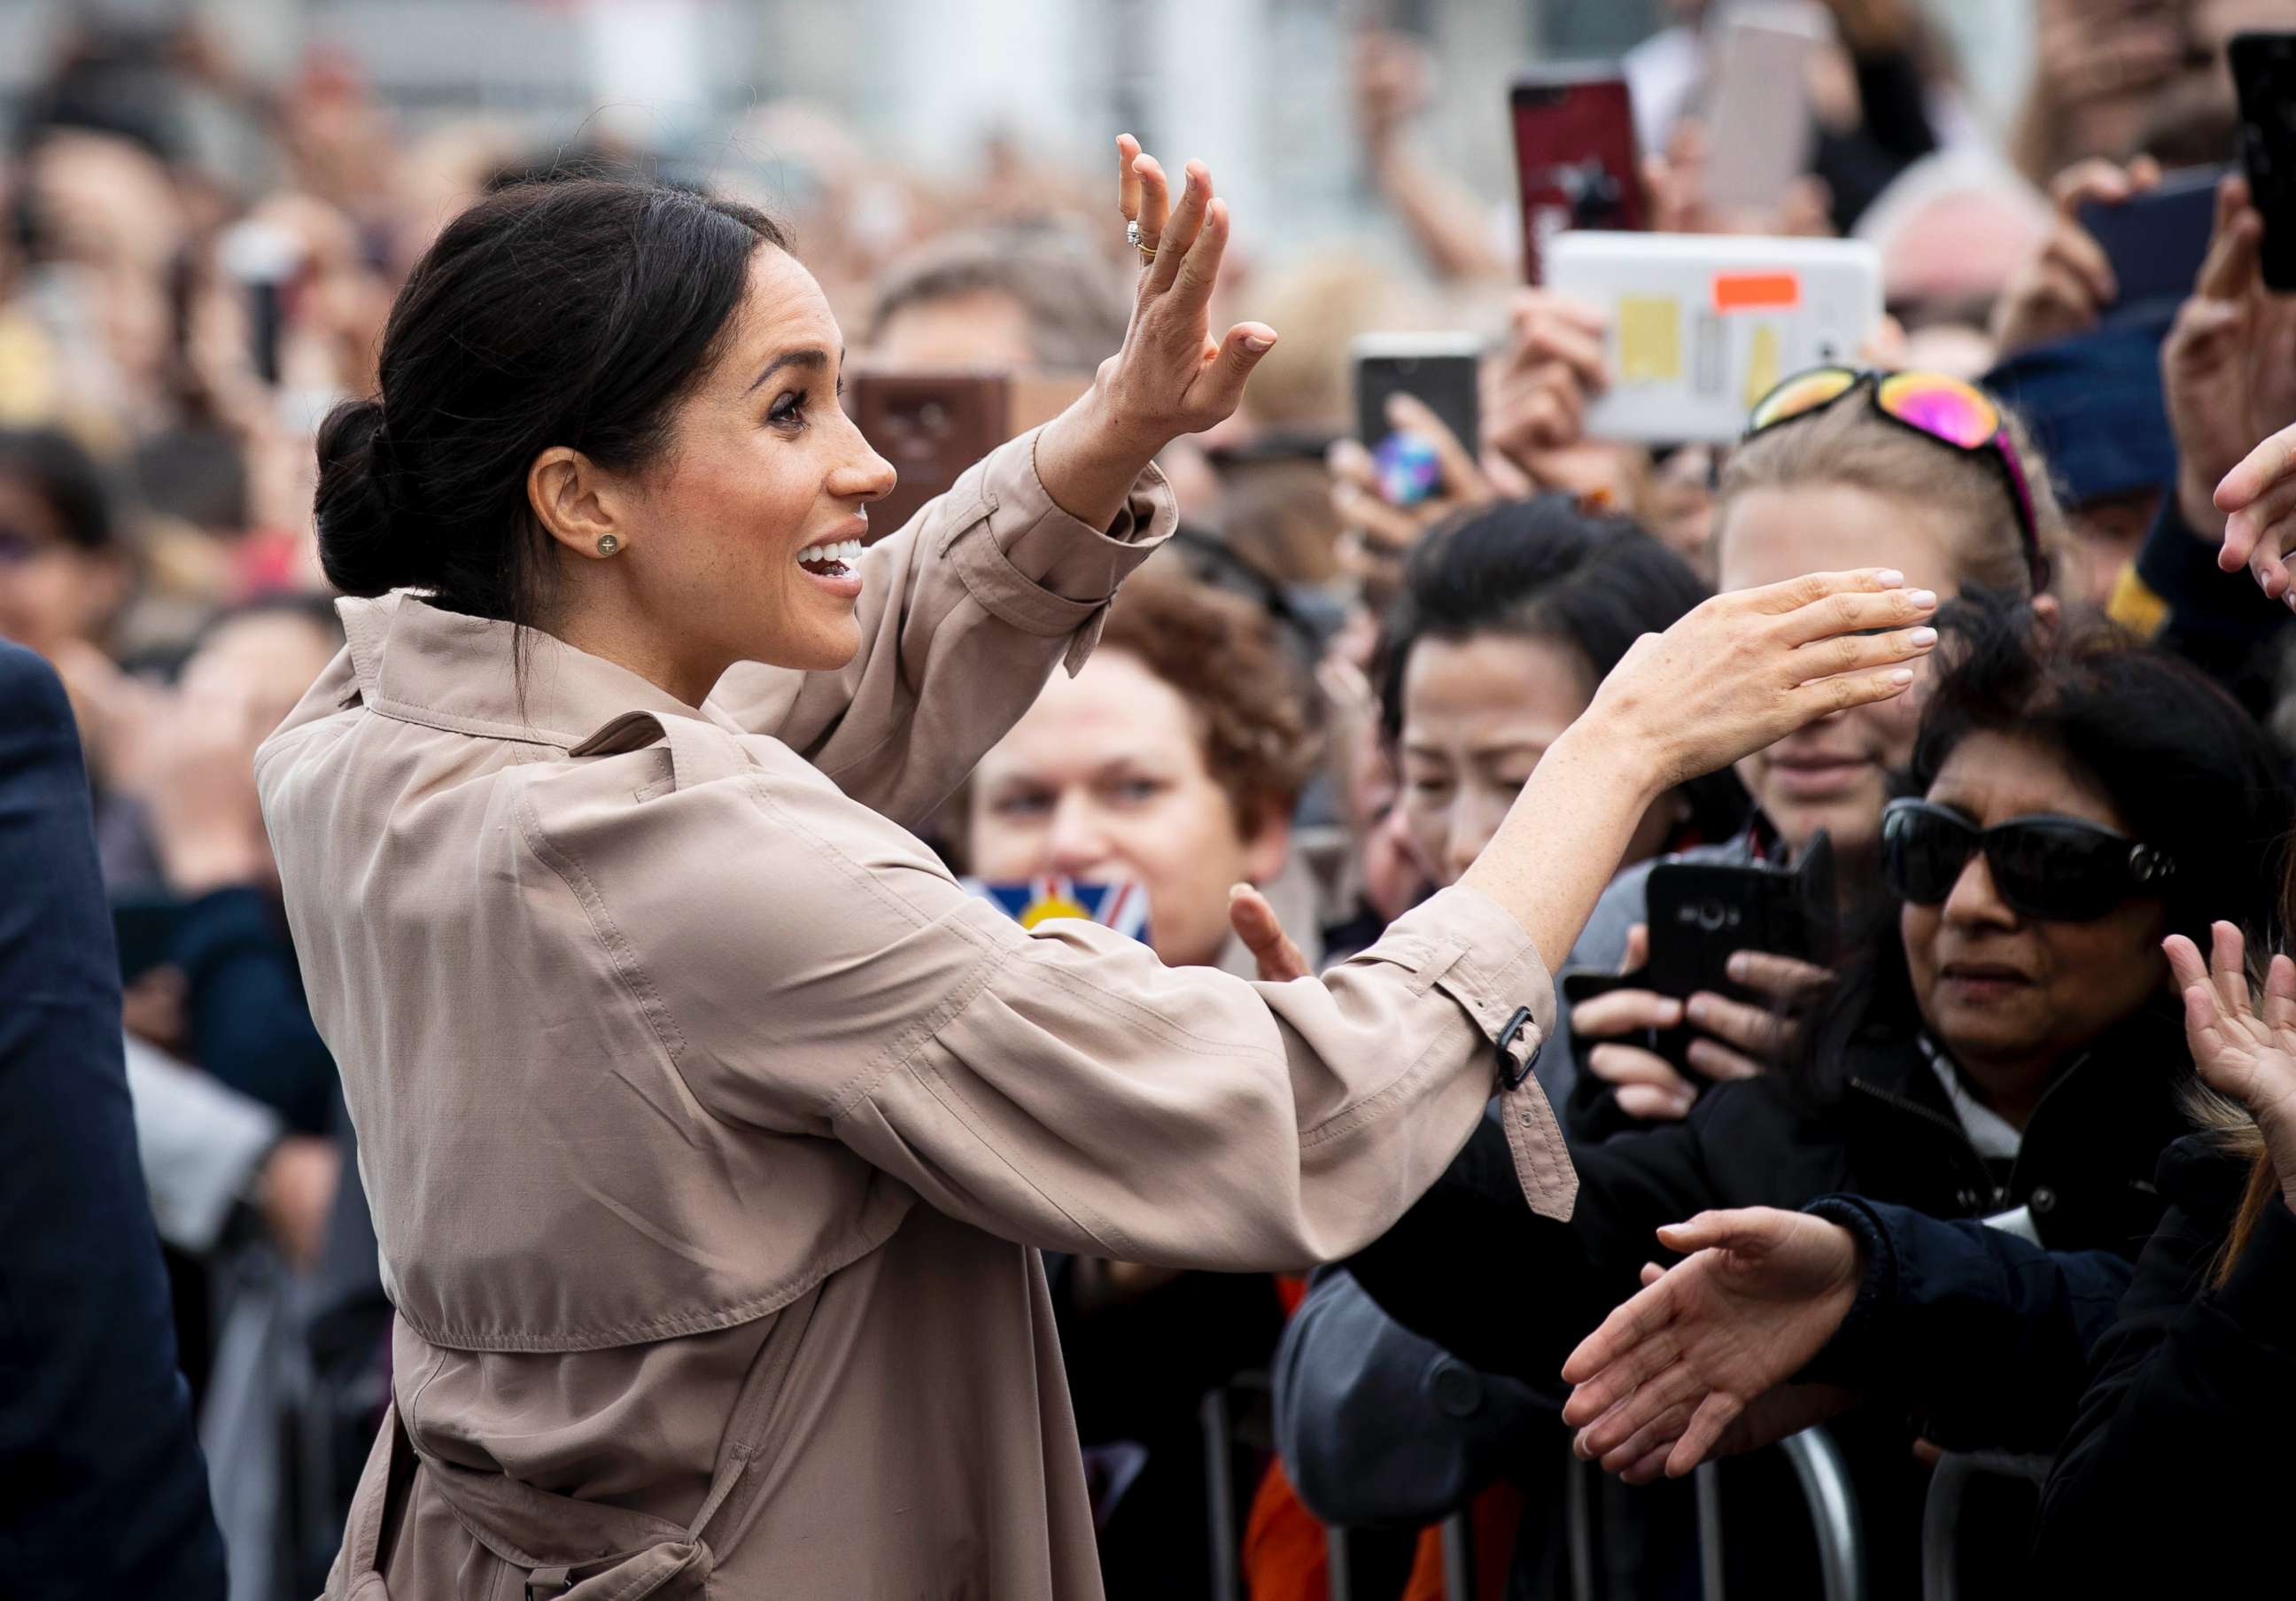 PHOTO: Meghan, Duchess of Sussex meets fans during a public walk along Auckland's Viaduct Harbour on Oct. 30, 2018 in Auckland, New Zealand.